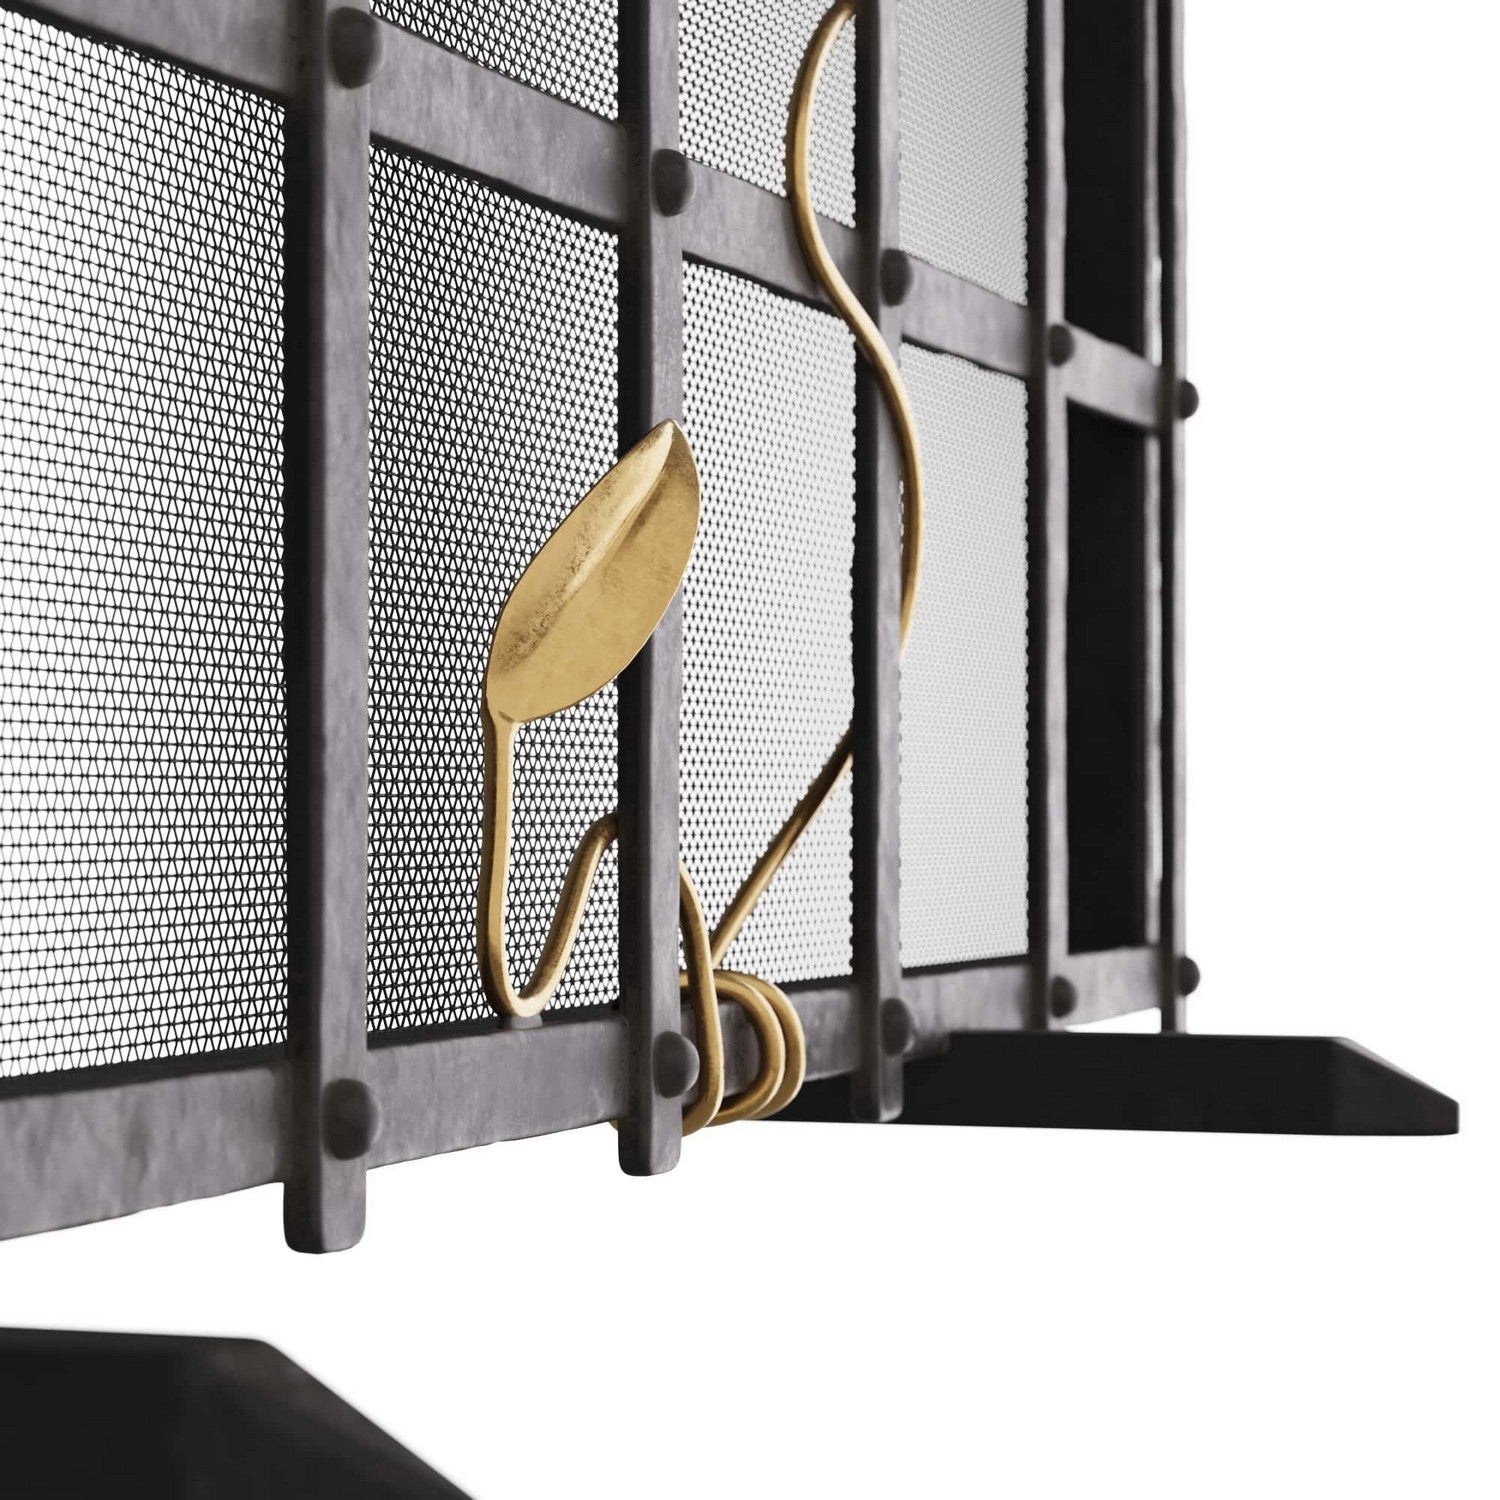 Fire Screen from the Rivet collection in Natural Iron finish